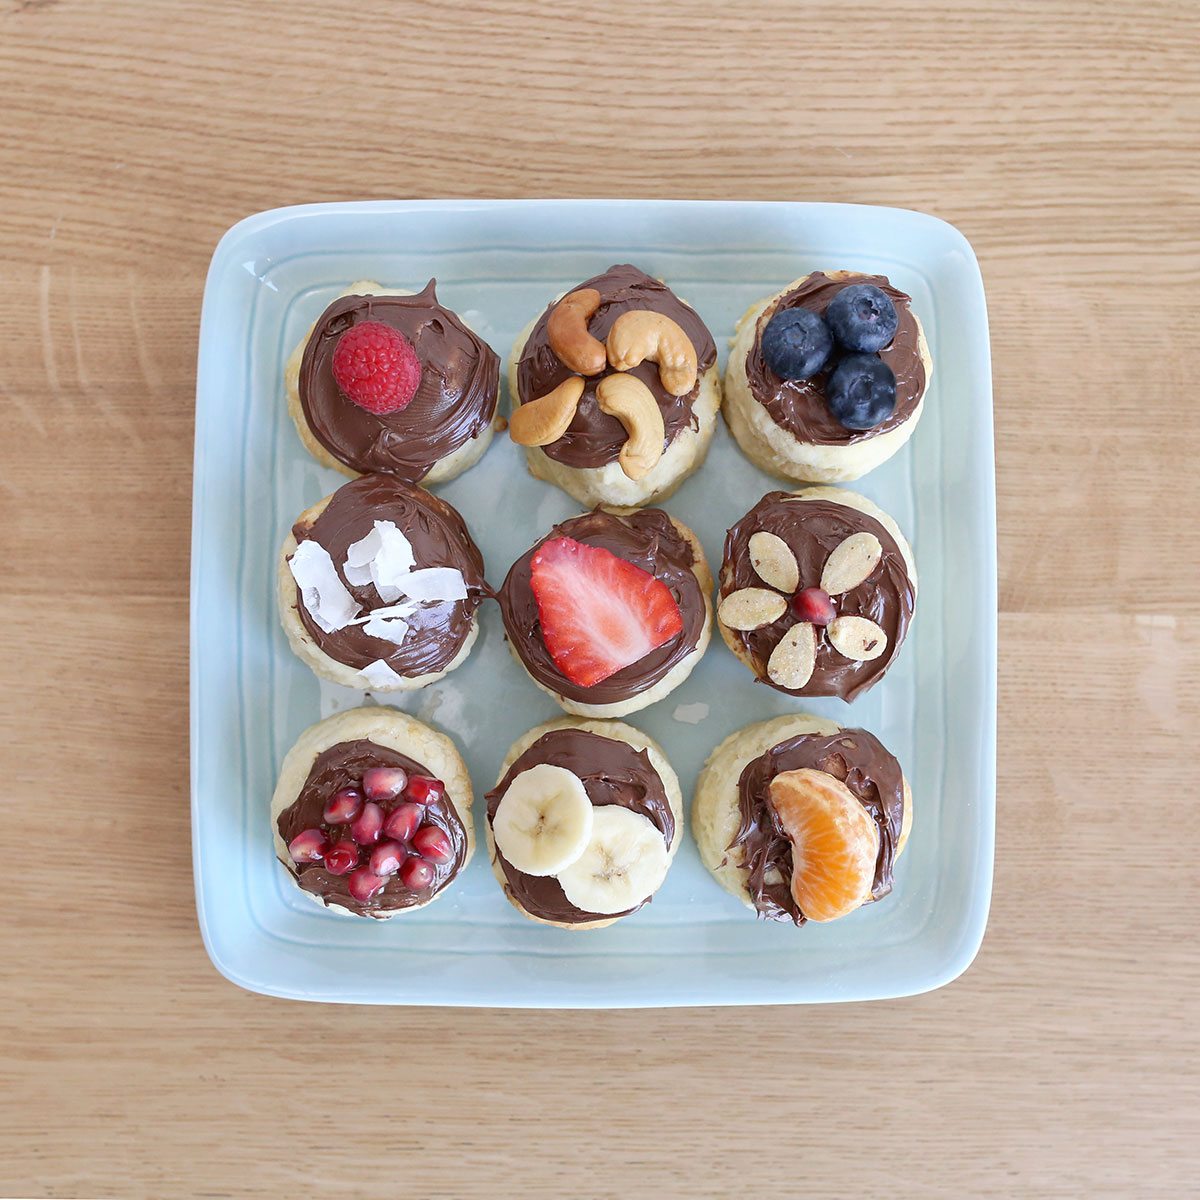 Plate of biscuits with fruit and Nutella on top